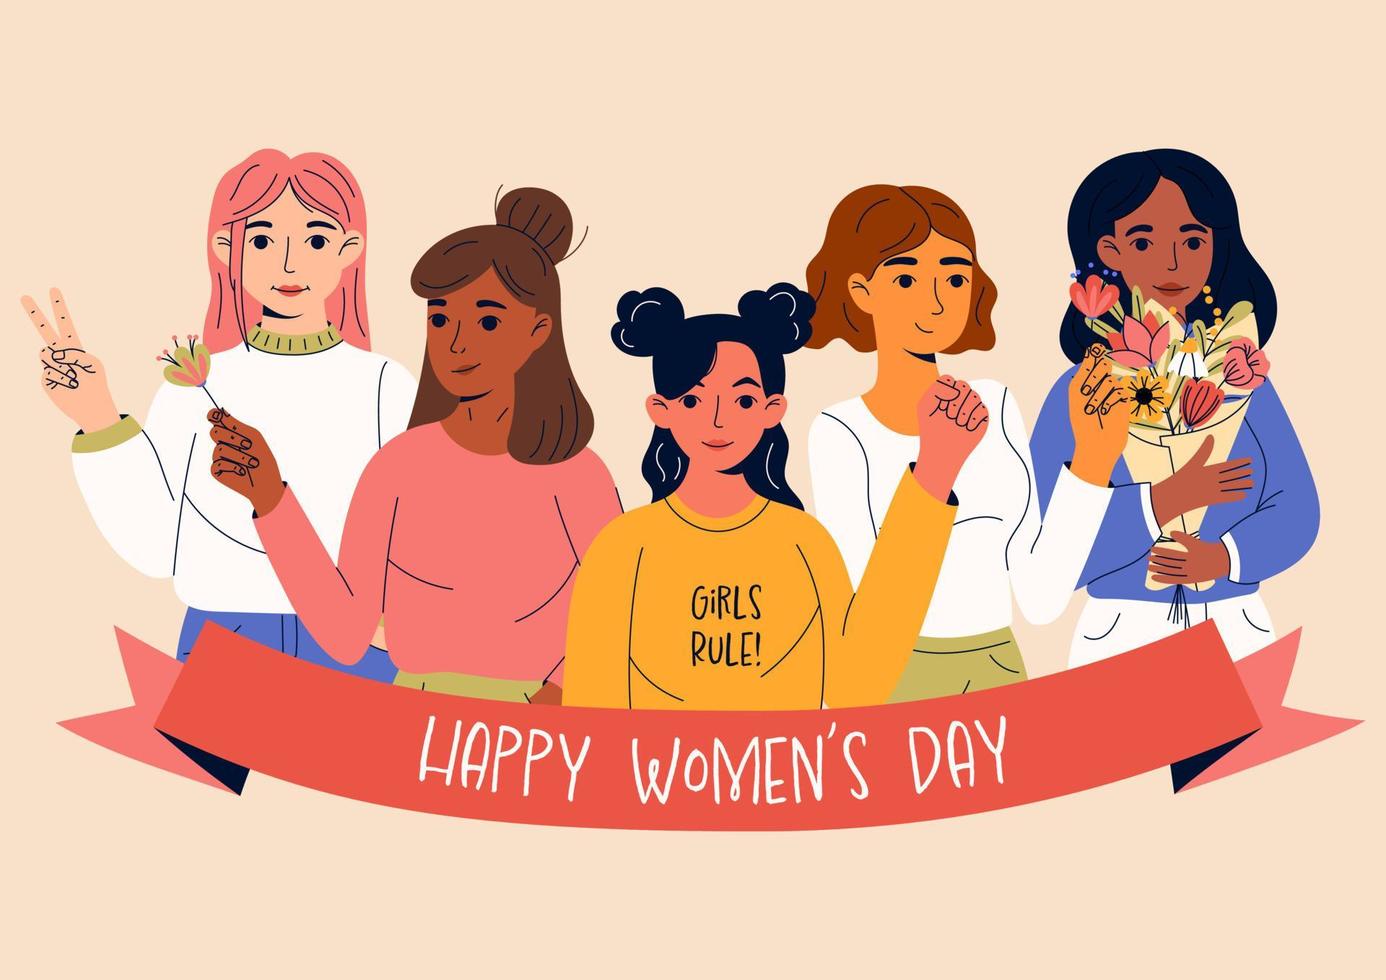 8 march, International Women's Day. Greeting card or postcard templates with young women for card, poster, flyer. Girl power, feminism, sisterhood concept. vector